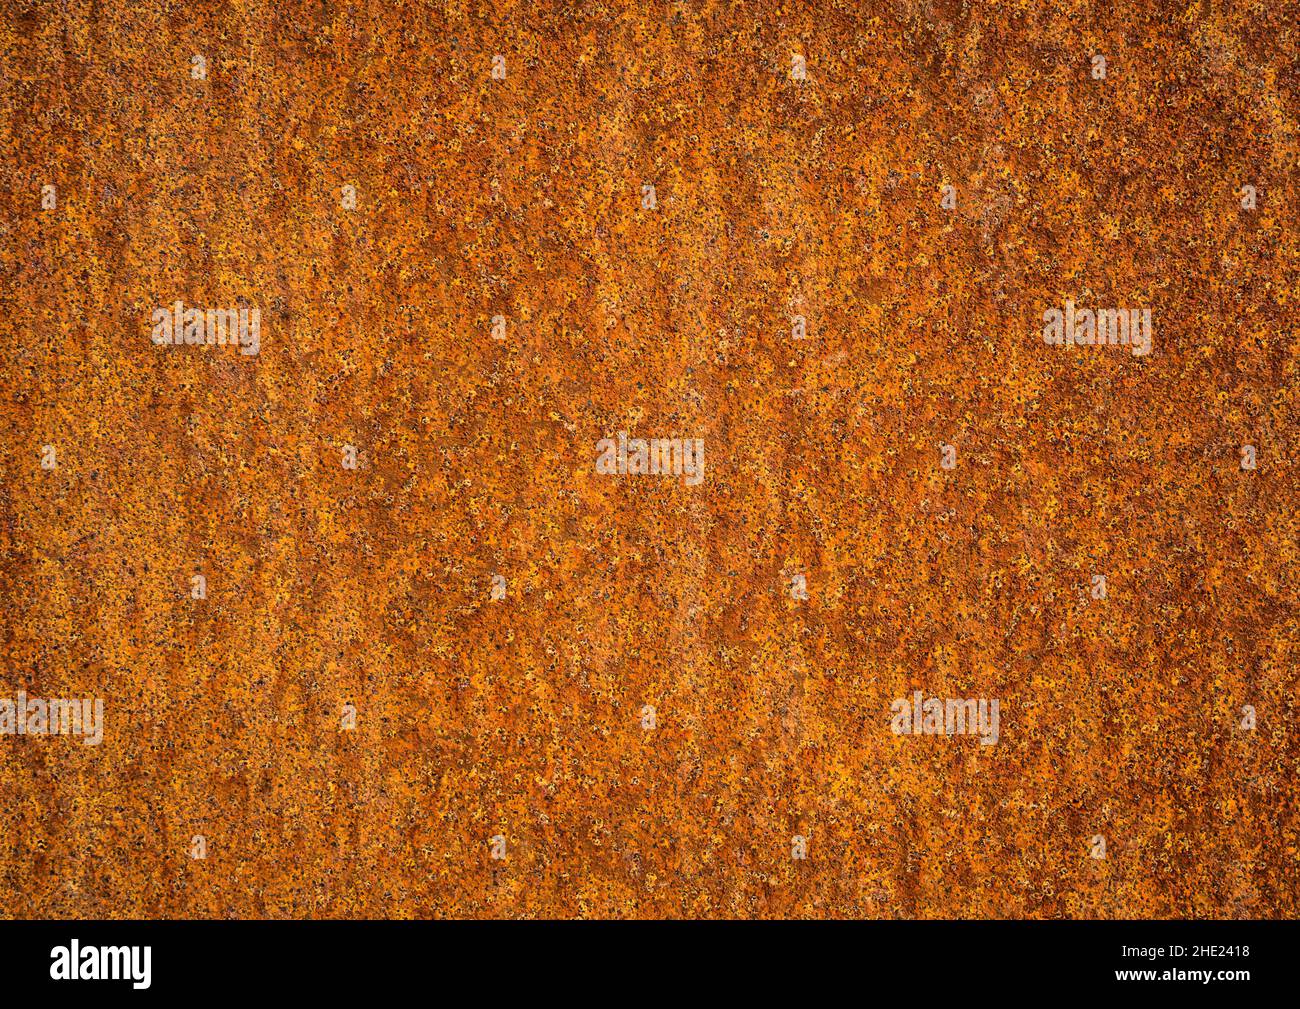 Metal plate full of rust with a lots of details. Stock Photo